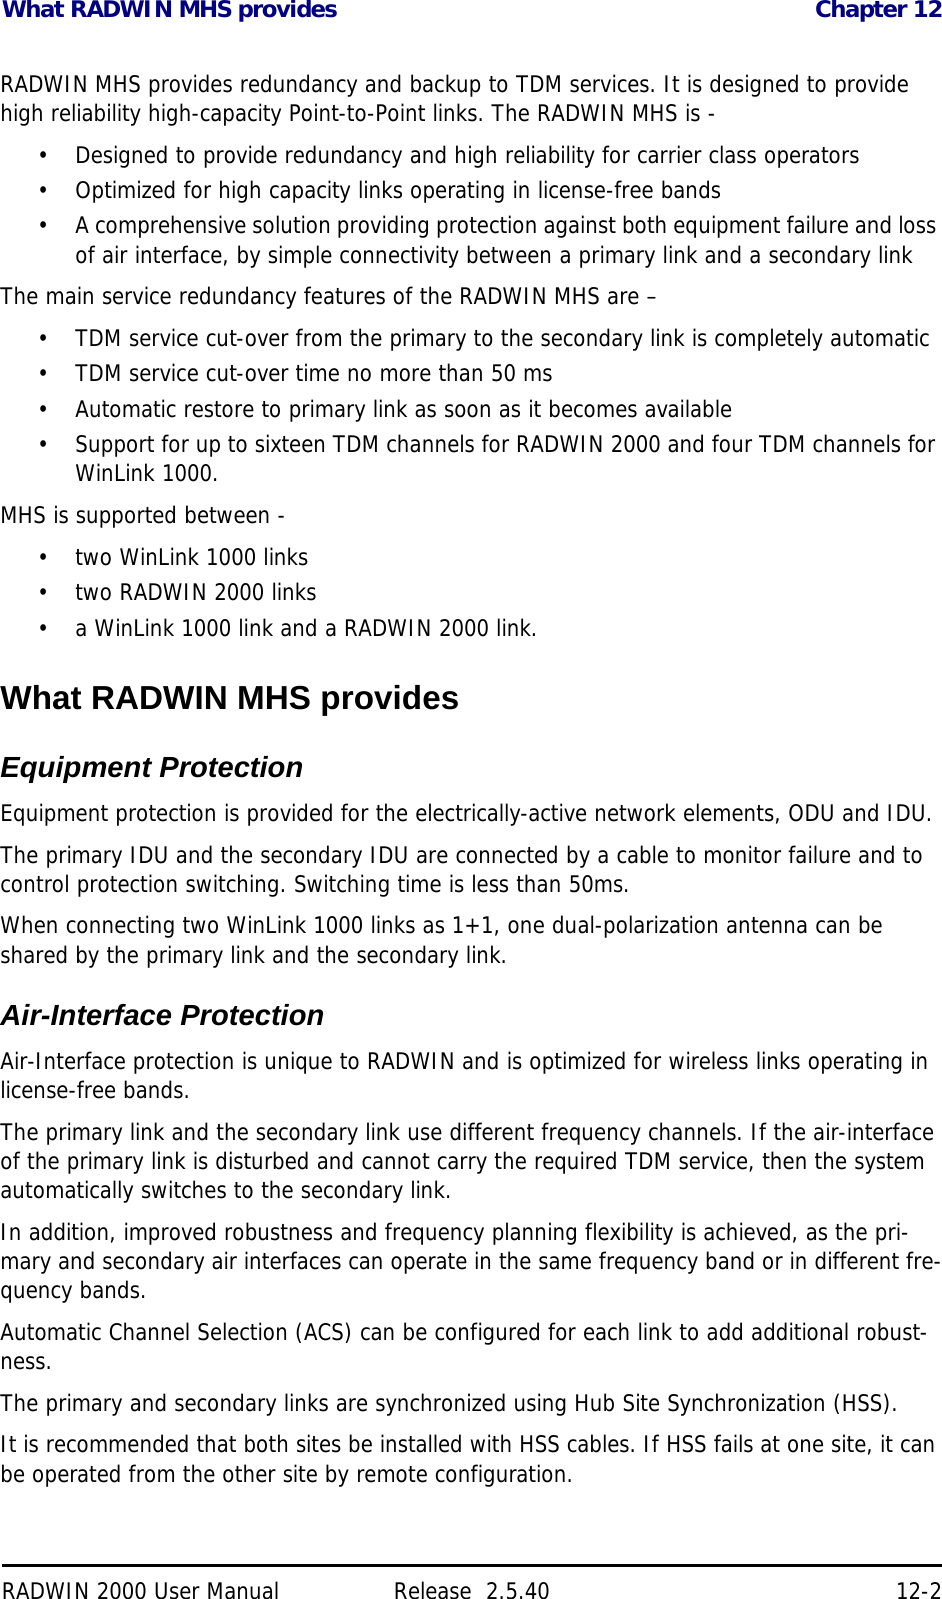 What RADWIN MHS provides Chapter 12RADWIN 2000 User Manual Release  2.5.40 12-2RADWIN MHS provides redundancy and backup to TDM services. It is designed to provide high reliability high-capacity Point-to-Point links. The RADWIN MHS is -• Designed to provide redundancy and high reliability for carrier class operators• Optimized for high capacity links operating in license-free bands• A comprehensive solution providing protection against both equipment failure and loss of air interface, by simple connectivity between a primary link and a secondary linkThe main service redundancy features of the RADWIN MHS are – • TDM service cut-over from the primary to the secondary link is completely automatic• TDM service cut-over time no more than 50 ms• Automatic restore to primary link as soon as it becomes available• Support for up to sixteen TDM channels for RADWIN 2000 and four TDM channels for WinLink 1000.MHS is supported between - • two WinLink 1000 links• two RADWIN 2000 links• a WinLink 1000 link and a RADWIN 2000 link. What RADWIN MHS providesEquipment ProtectionEquipment protection is provided for the electrically-active network elements, ODU and IDU.The primary IDU and the secondary IDU are connected by a cable to monitor failure and to control protection switching. Switching time is less than 50ms. When connecting two WinLink 1000 links as 1+1, one dual-polarization antenna can be shared by the primary link and the secondary link.Air-Interface ProtectionAir-Interface protection is unique to RADWIN and is optimized for wireless links operating in license-free bands.The primary link and the secondary link use different frequency channels. If the air-interface of the primary link is disturbed and cannot carry the required TDM service, then the system automatically switches to the secondary link.In addition, improved robustness and frequency planning flexibility is achieved, as the pri-mary and secondary air interfaces can operate in the same frequency band or in different fre-quency bands.Automatic Channel Selection (ACS) can be configured for each link to add additional robust-ness.The primary and secondary links are synchronized using Hub Site Synchronization (HSS).It is recommended that both sites be installed with HSS cables. If HSS fails at one site, it can be operated from the other site by remote configuration.